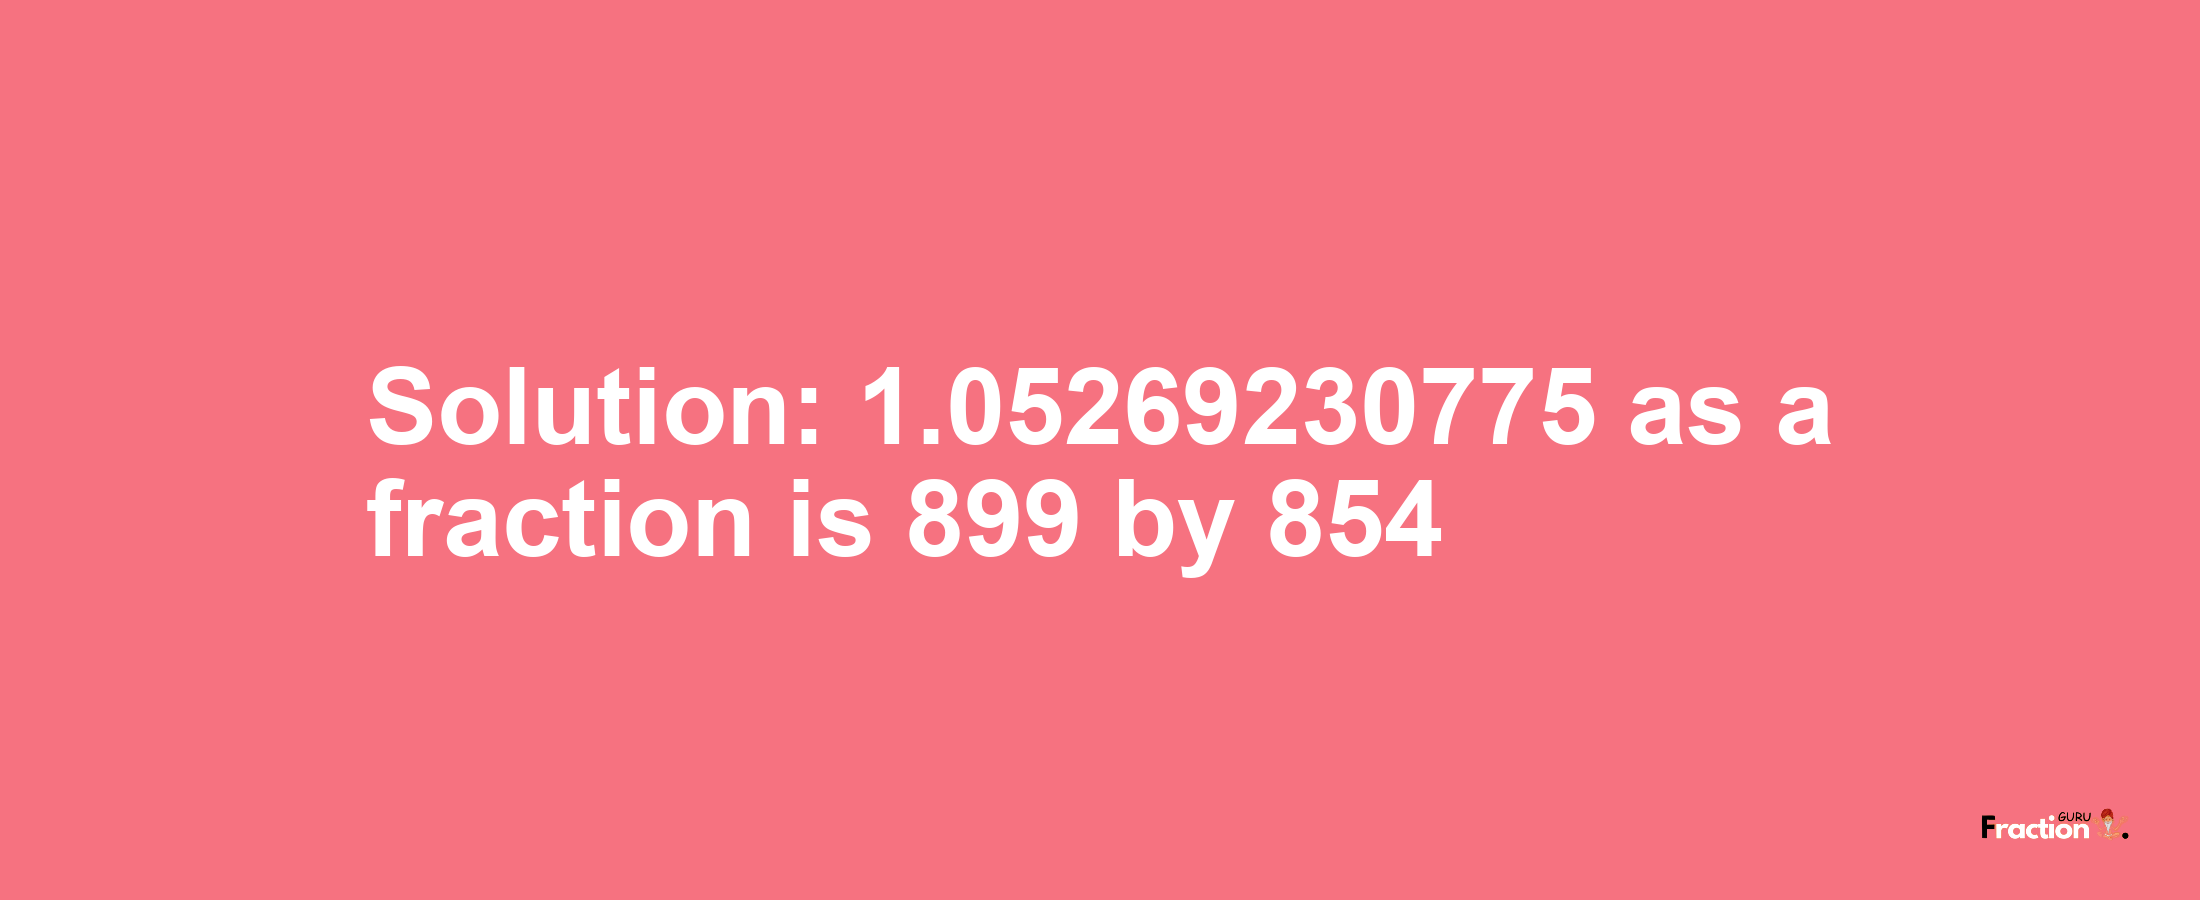 Solution:1.05269230775 as a fraction is 899/854